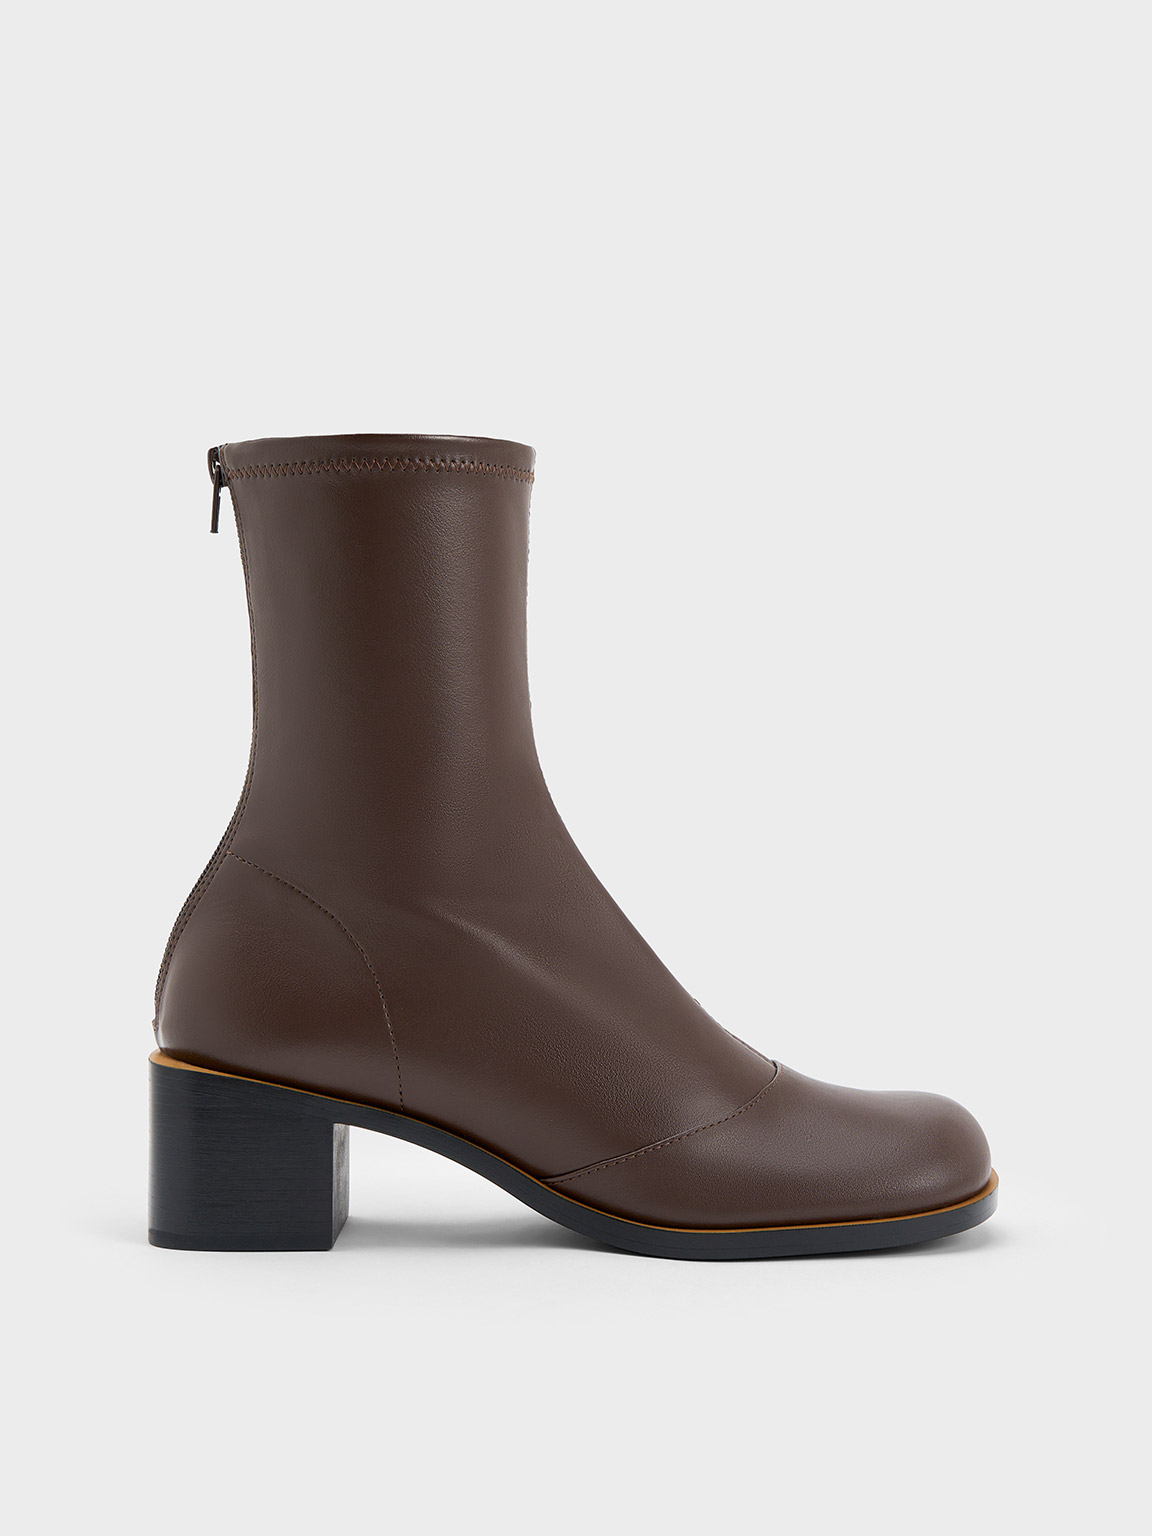 Dark Brown Stitch Trim Ankle Boots - CHARLES & KEITH AE